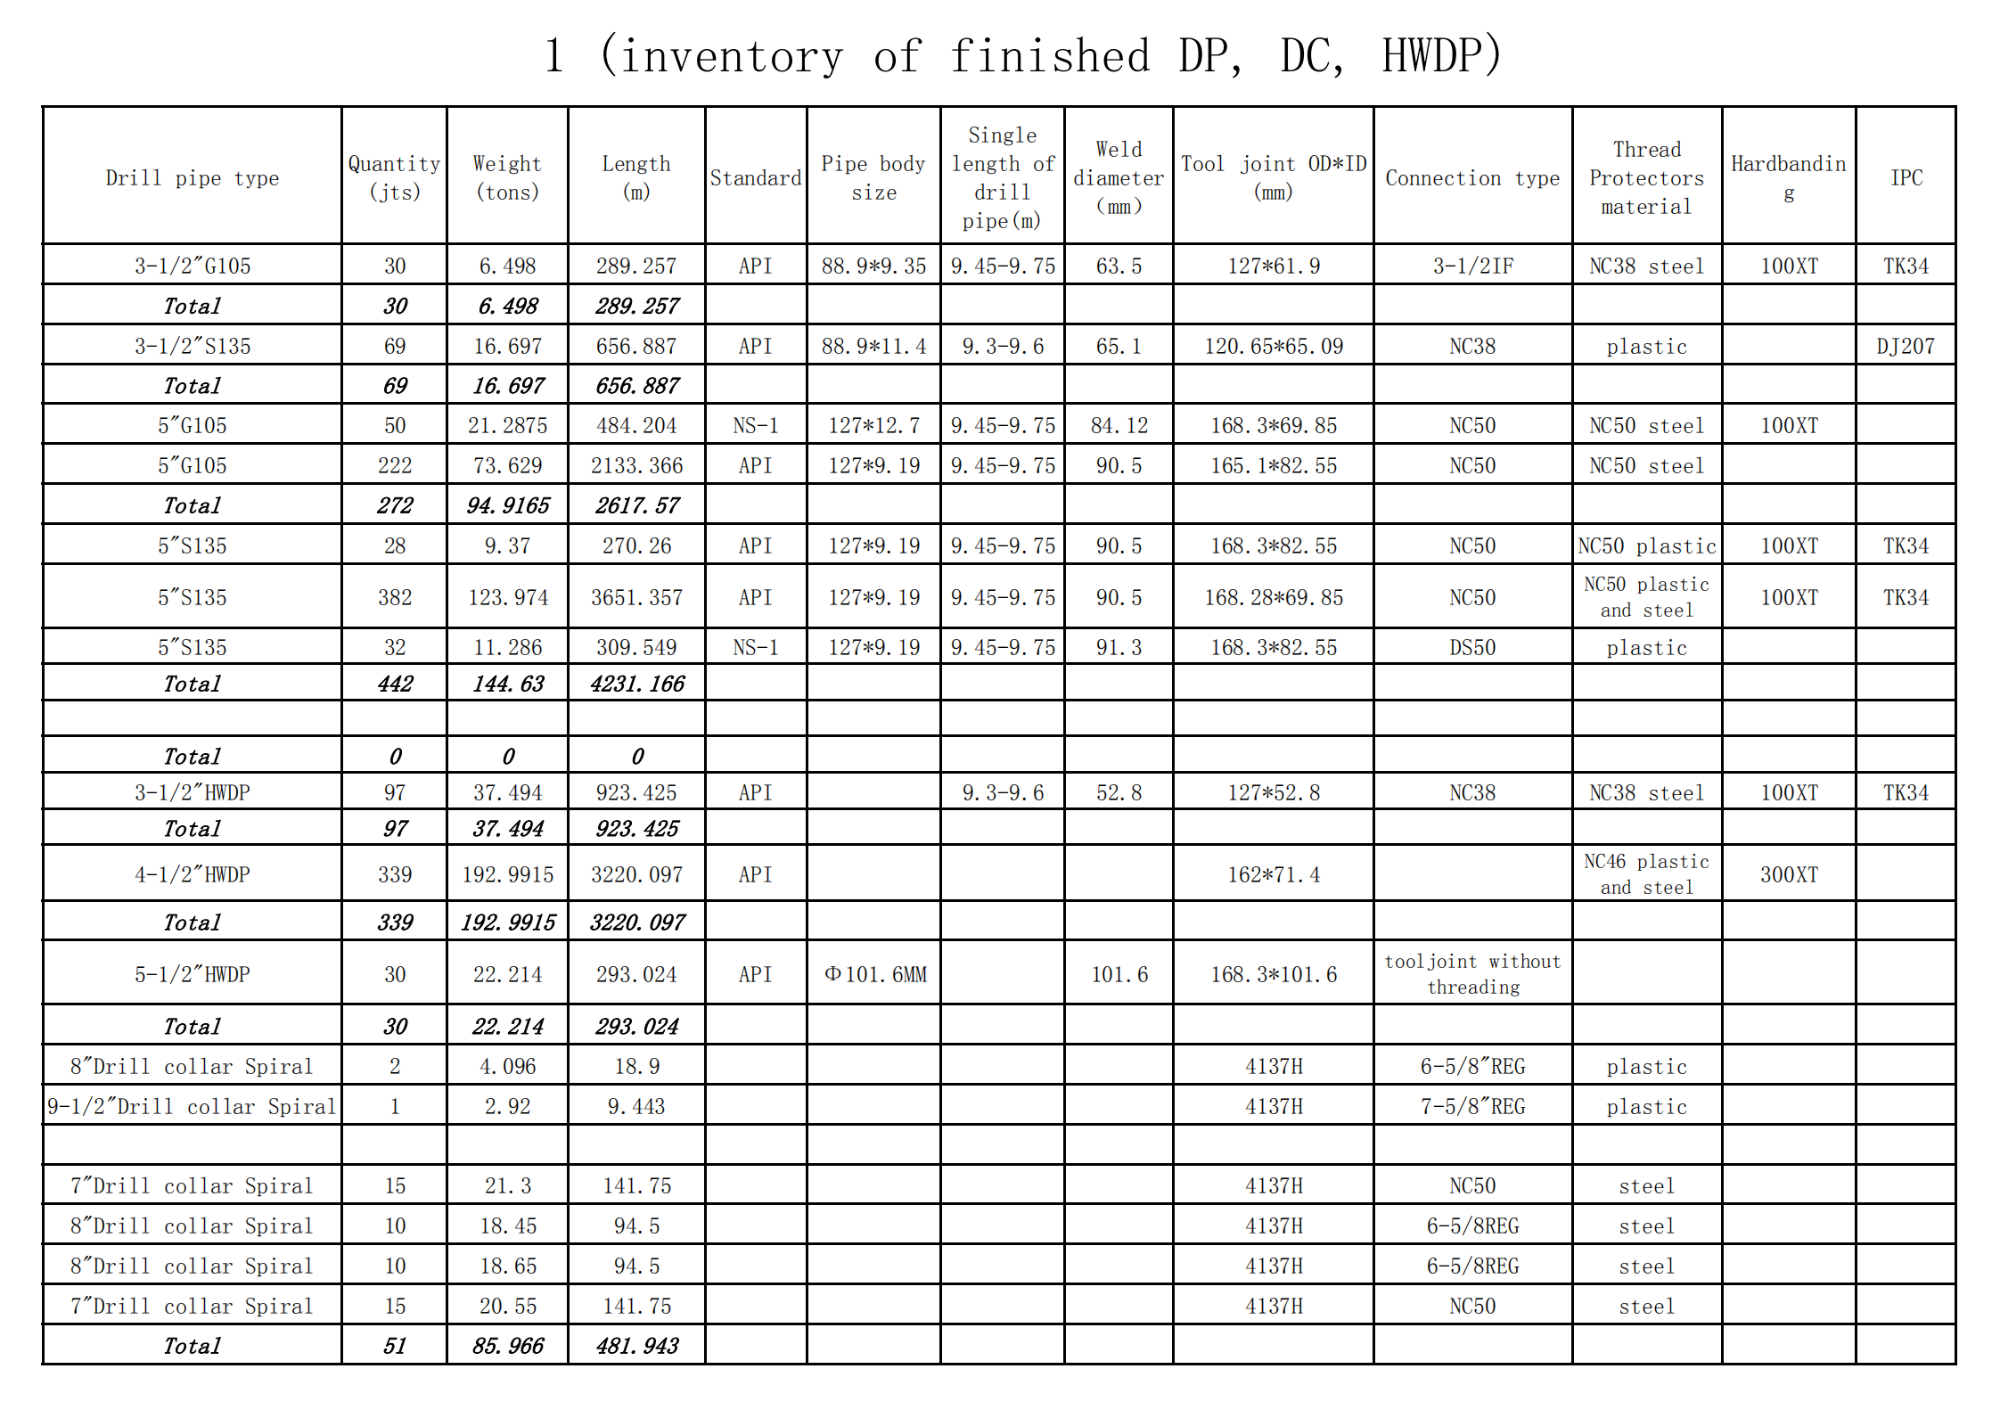 Inventory of Finished DP, DC, HWDP